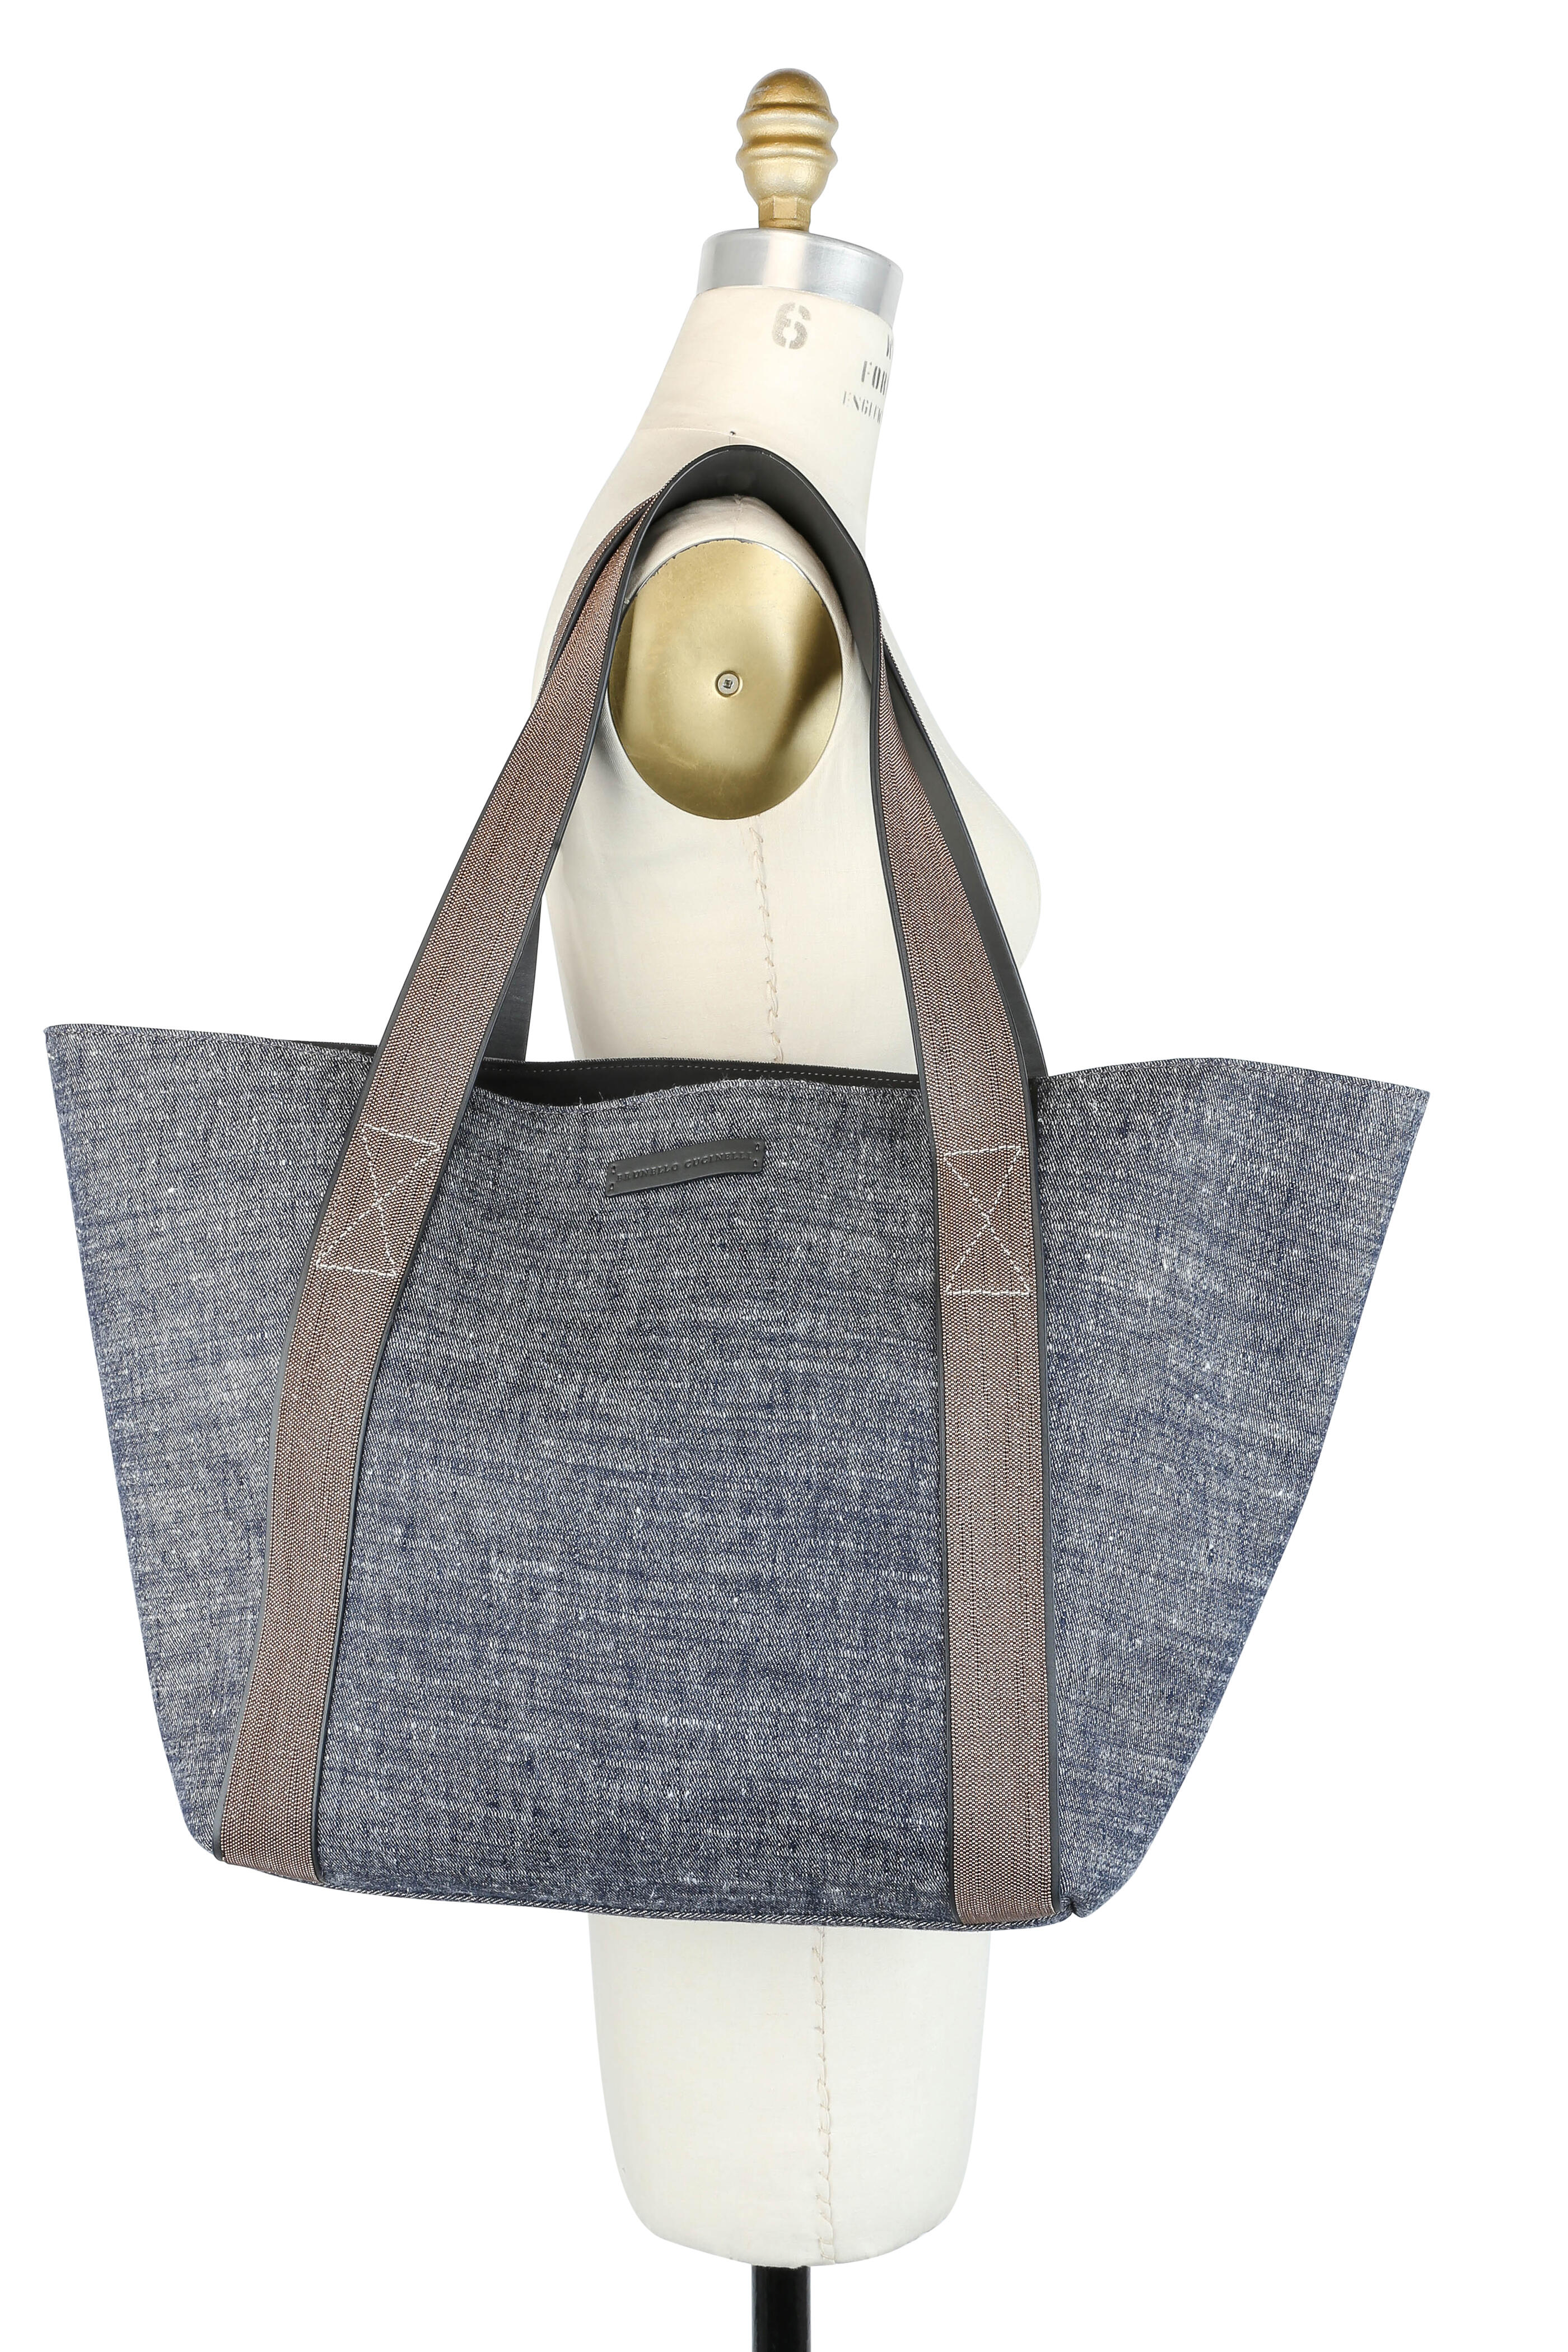 Jimmy choo 9 to 5 tote In denim with leather trims in navy